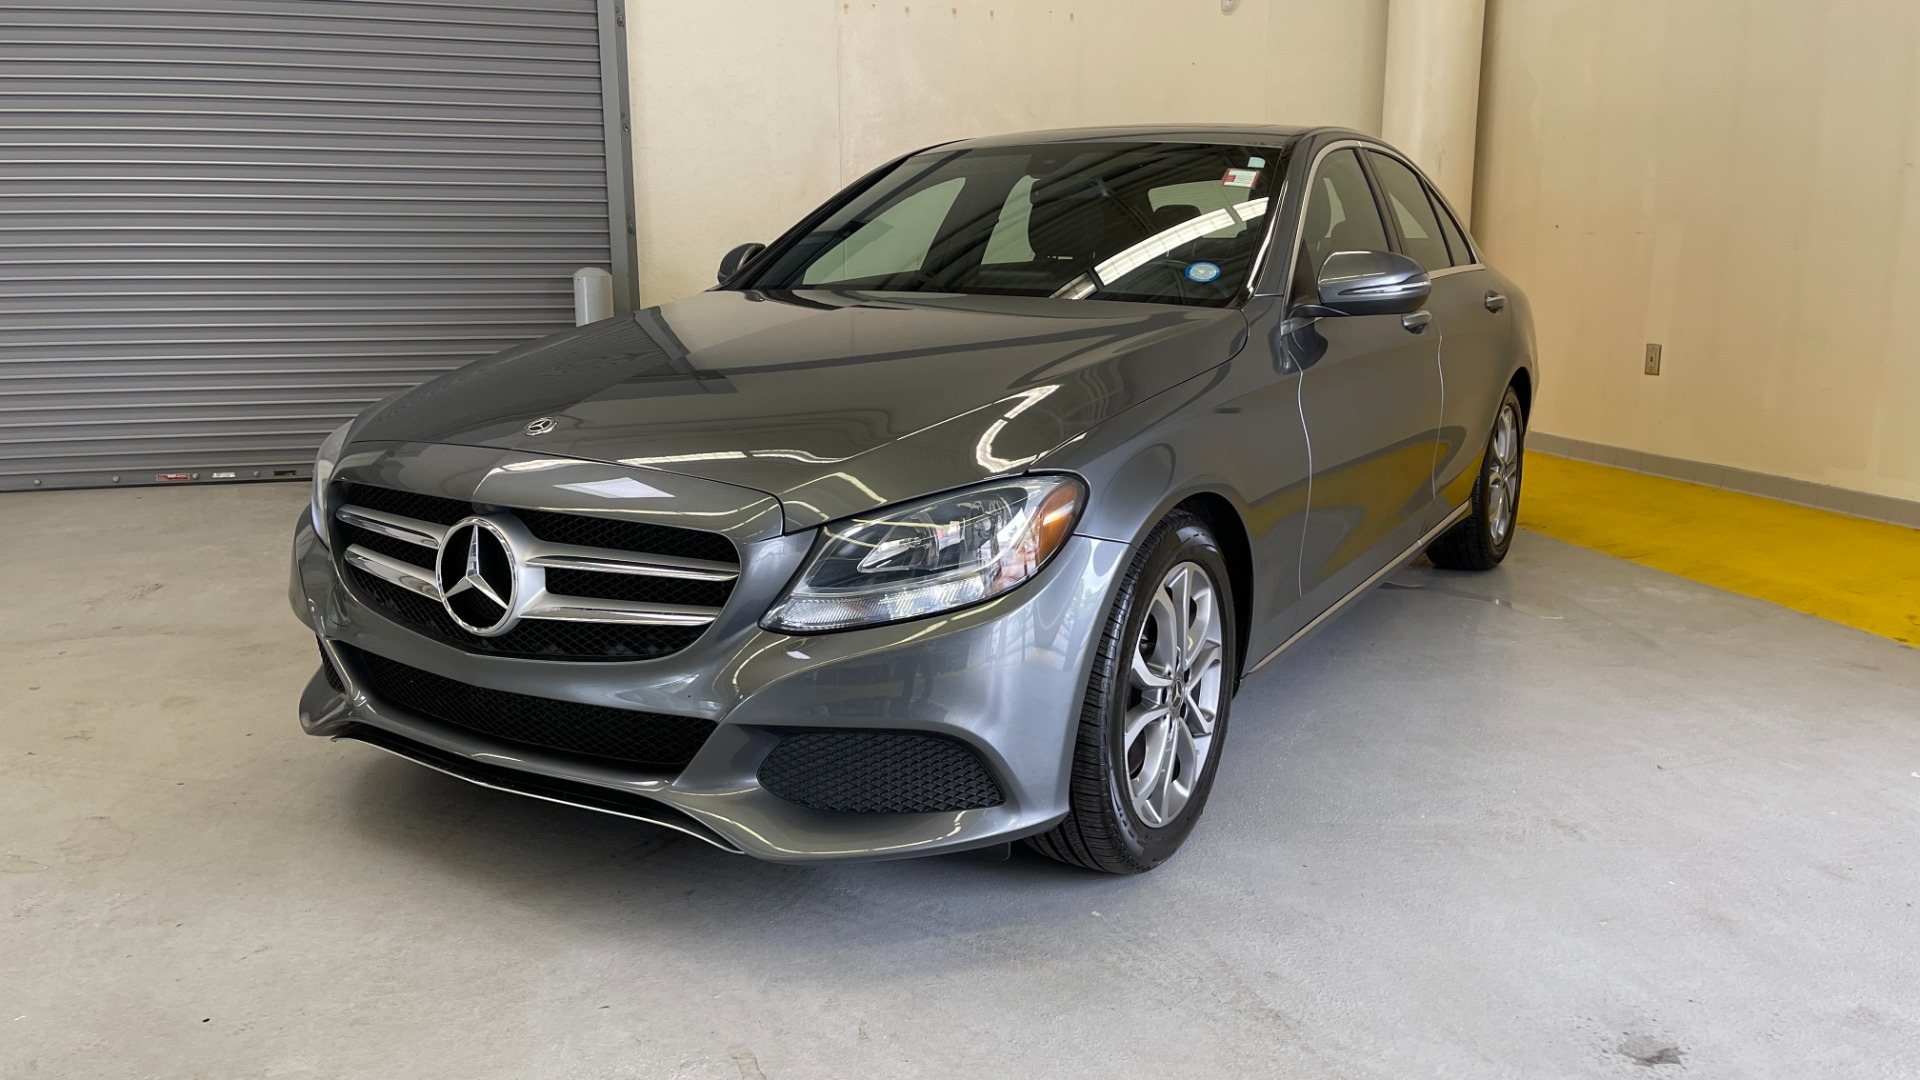 Used 2018 Mercedes-Benz C-CLASS C 300 PREMIUM / KEYLESS-GO / HTD STS / APPLE CARPLAY / REARVIEW for sale Sold at Formula Imports in Charlotte NC 28227 4